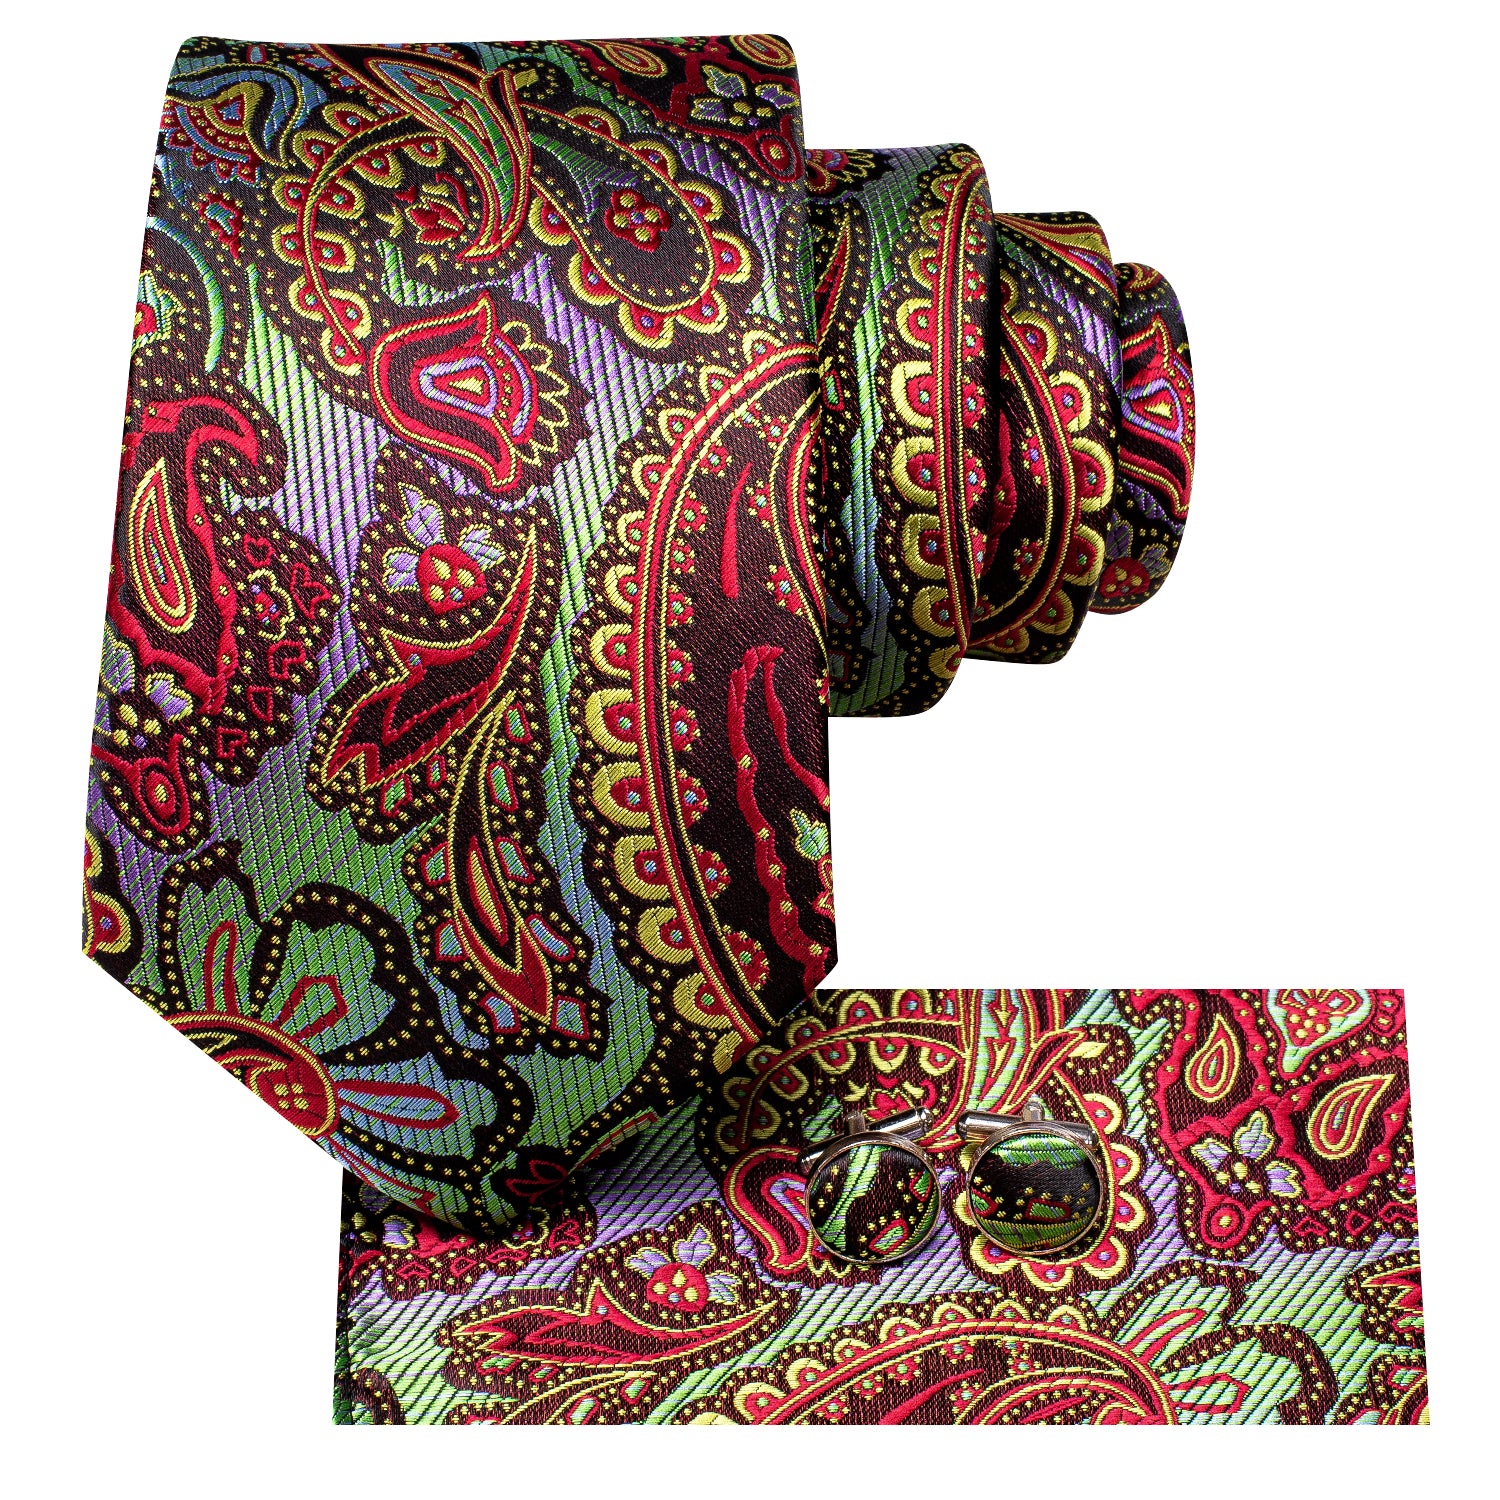 New Colorful Paisley Tie Pocket Square Cufflinks Set